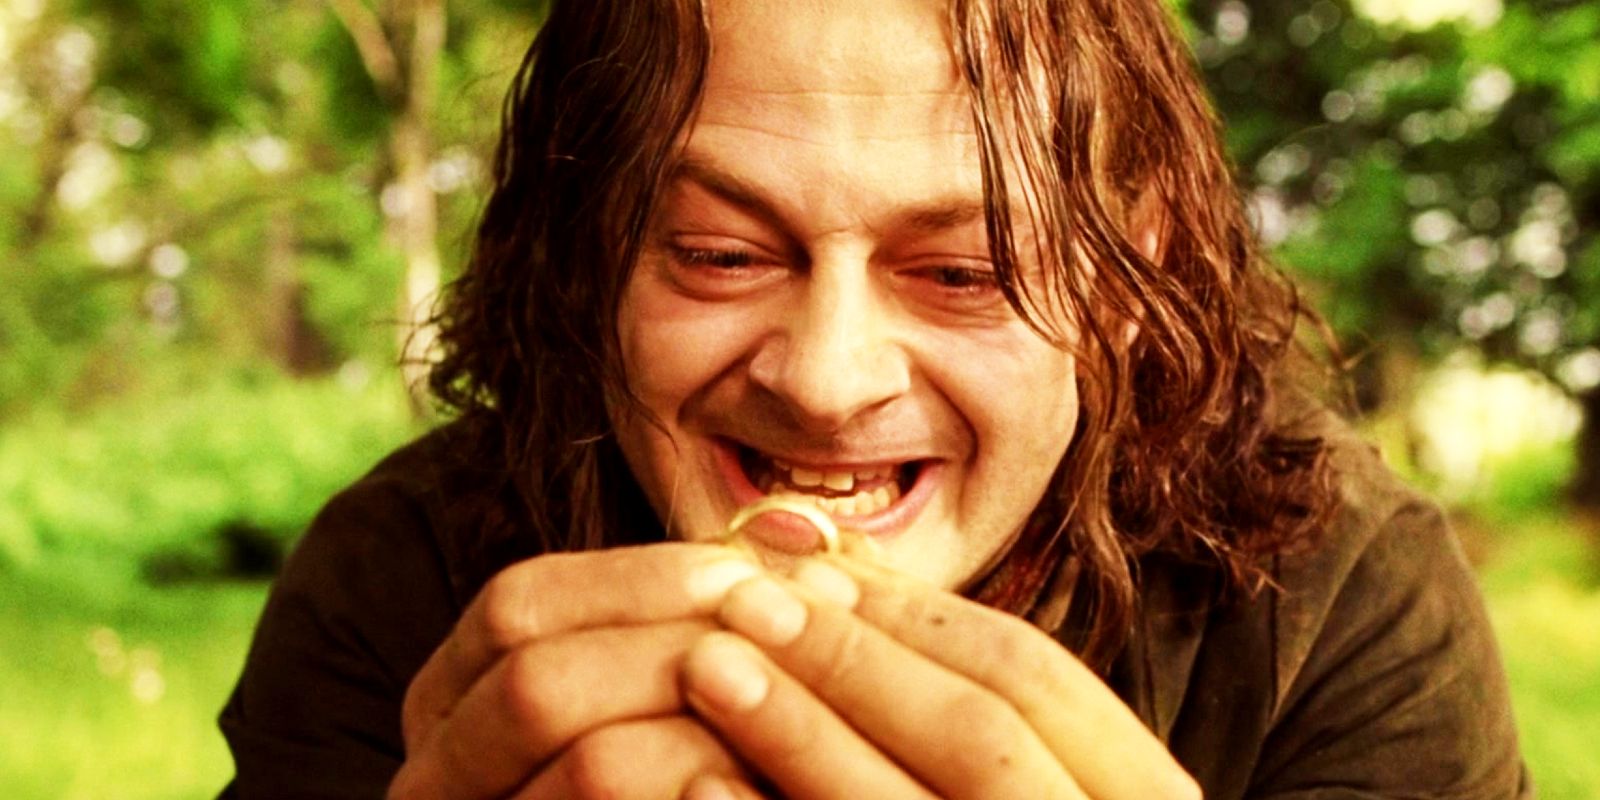 Andy Serkis as Smeagol aka Gollum holding the Ring in The Lord of the Rings The Return of the King